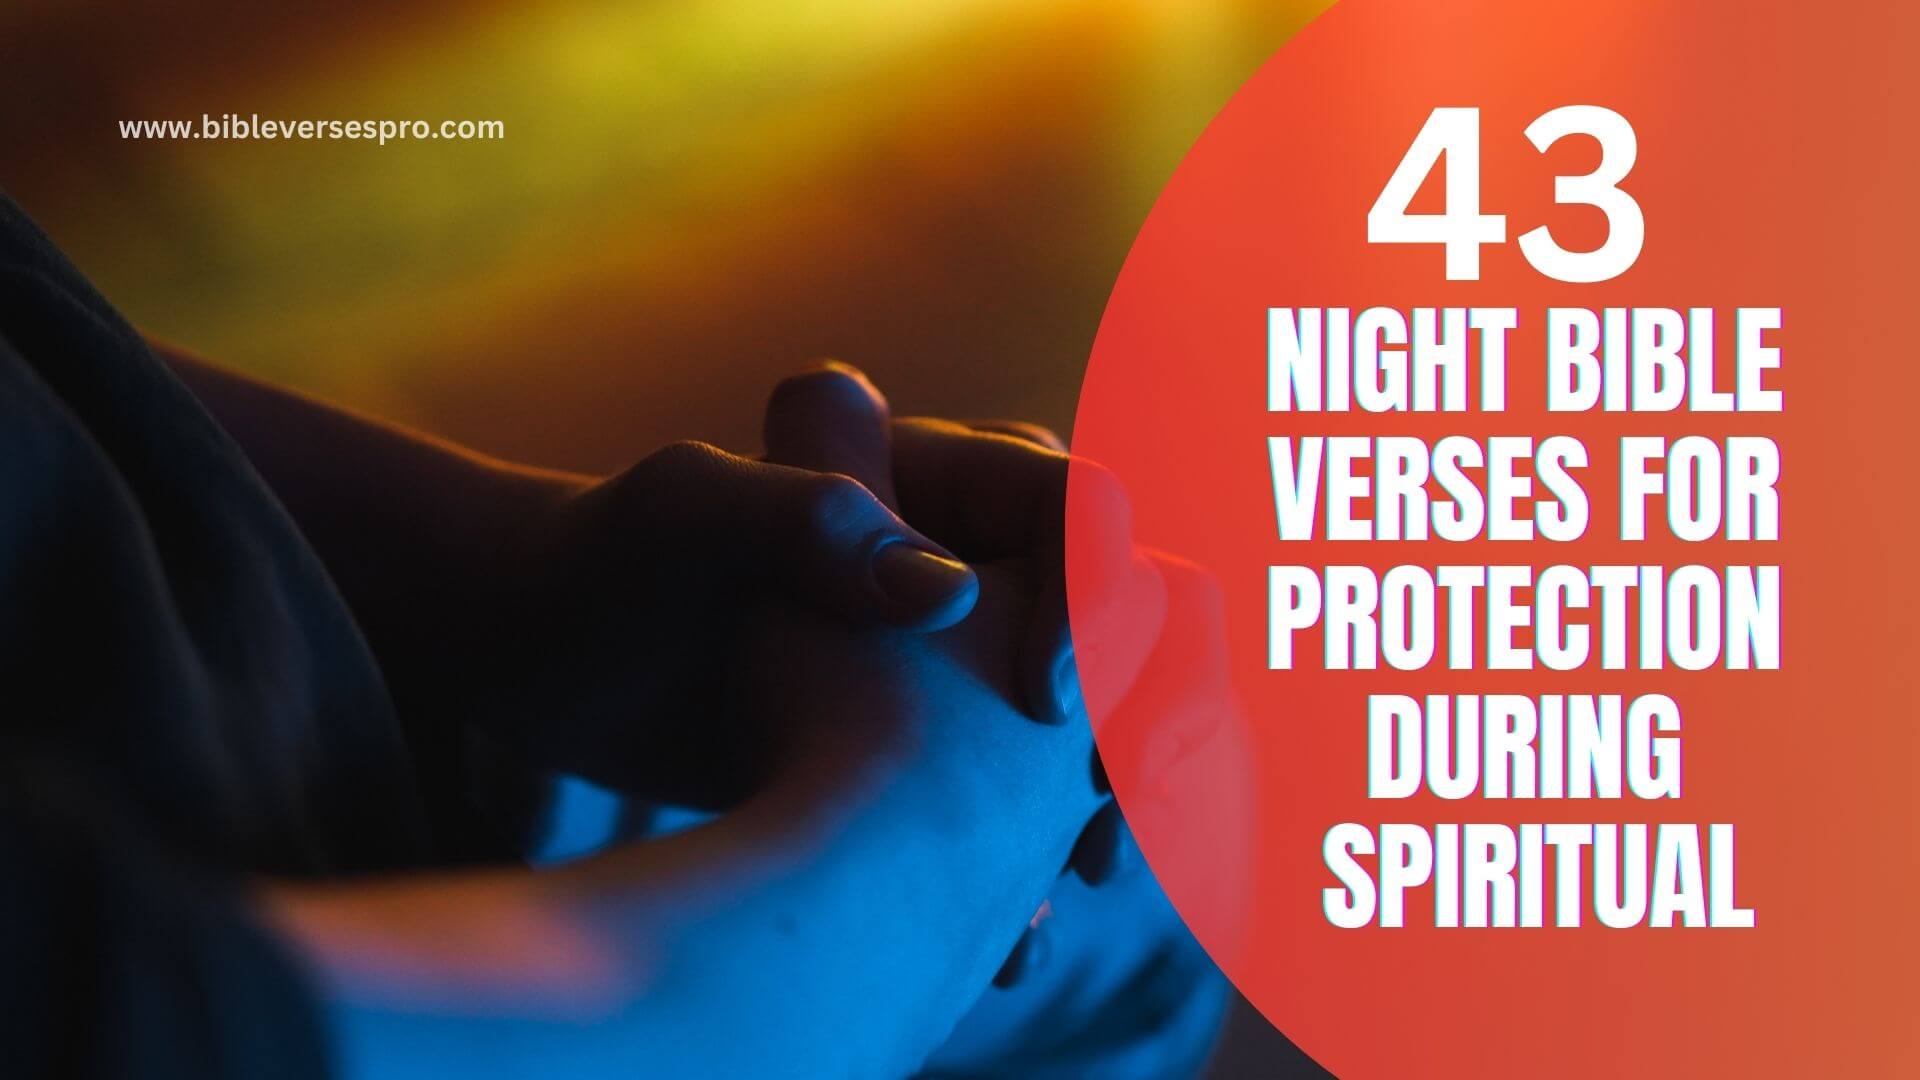 Night Bible Verses For Protection During Spiritual